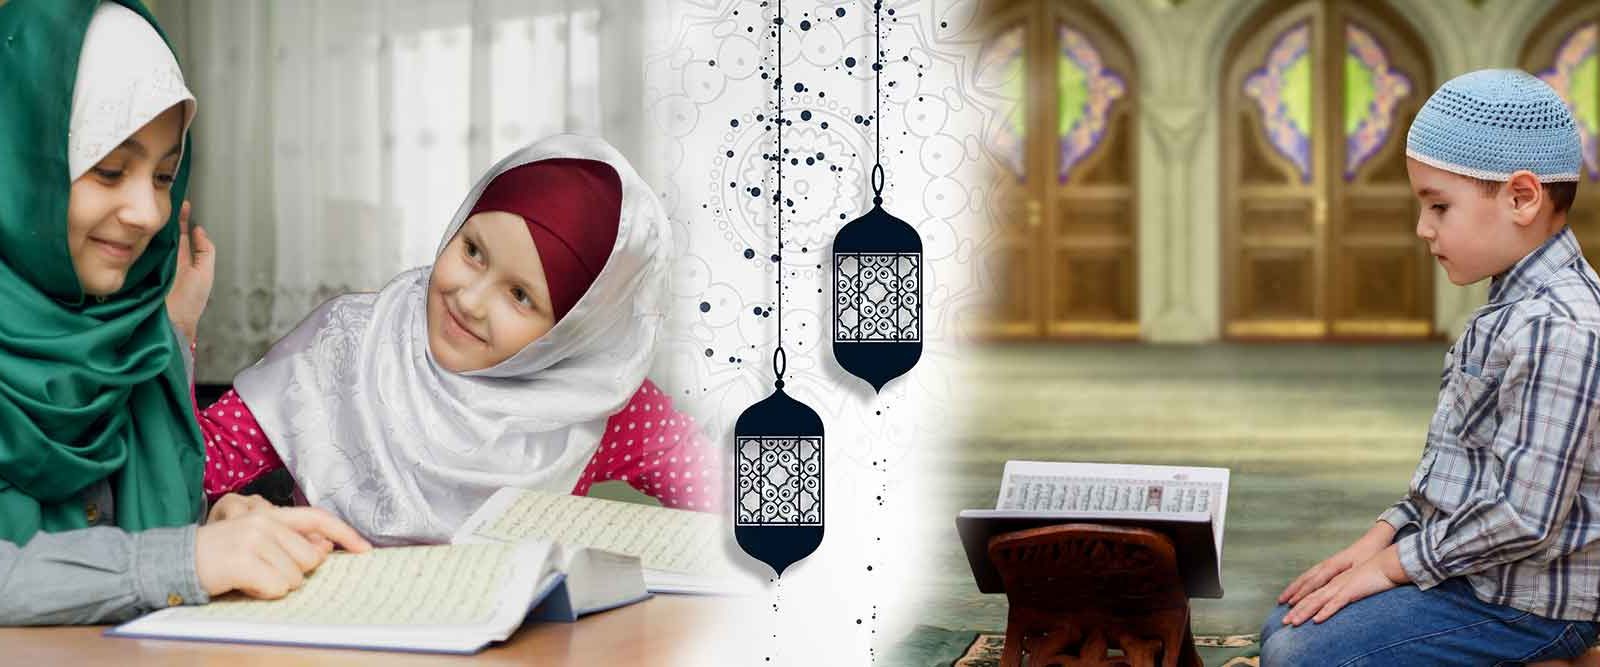 Guidelines For Quran Classes And Learning